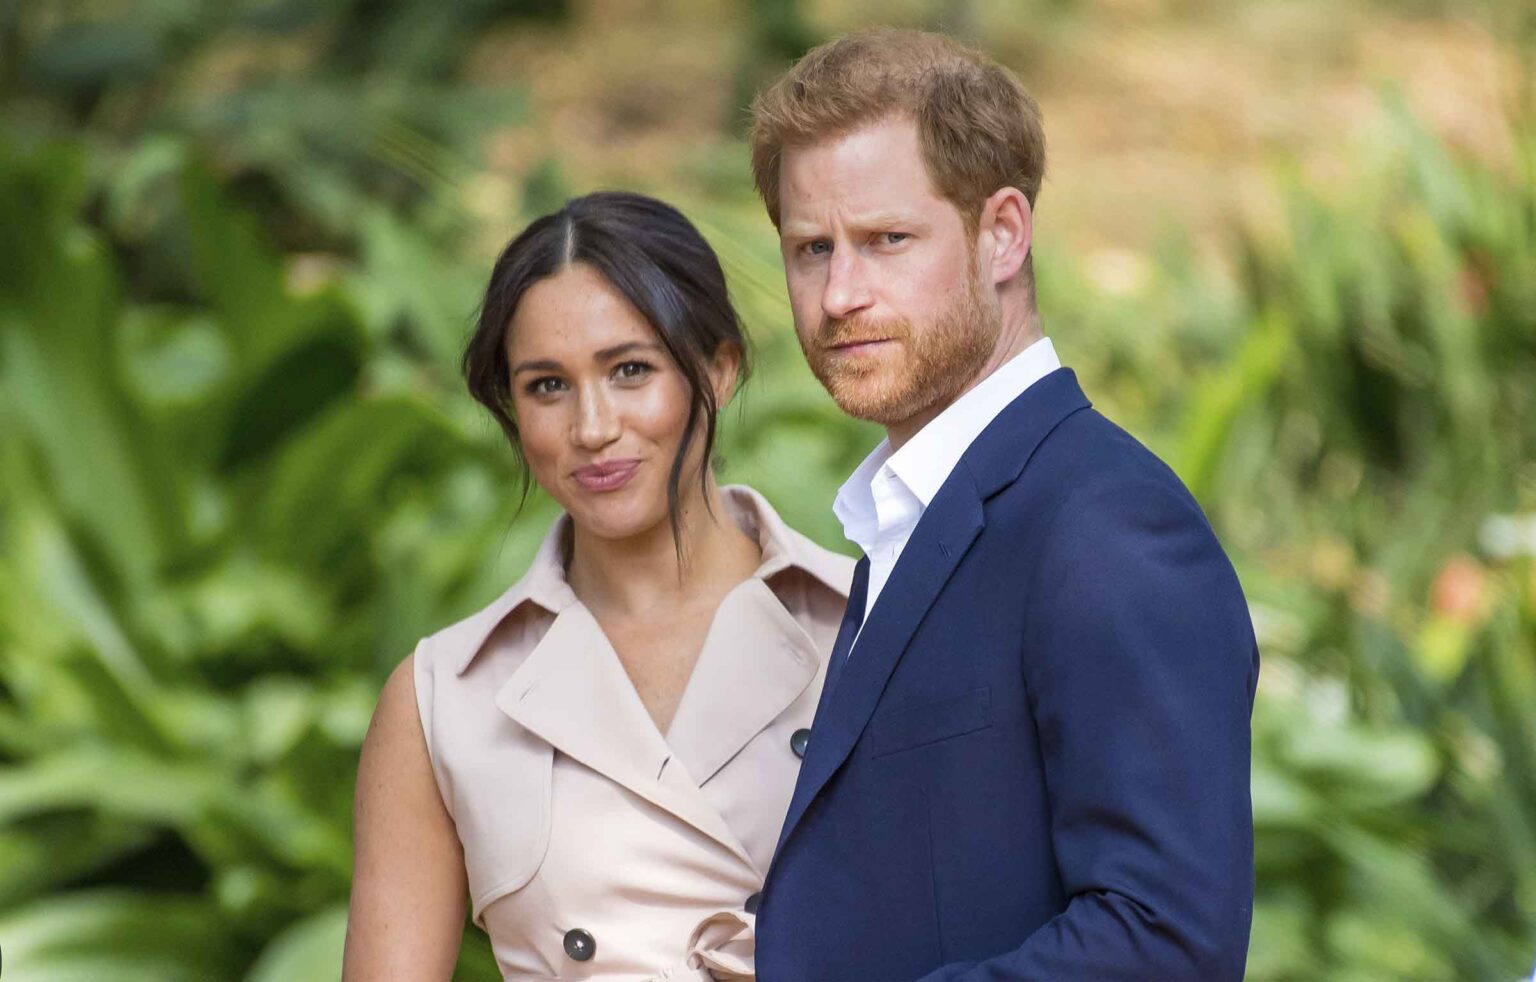 Prince Harry and Meghan Markle have moved into a multi-million dollar starter home. Here's a look inside their new mansion.